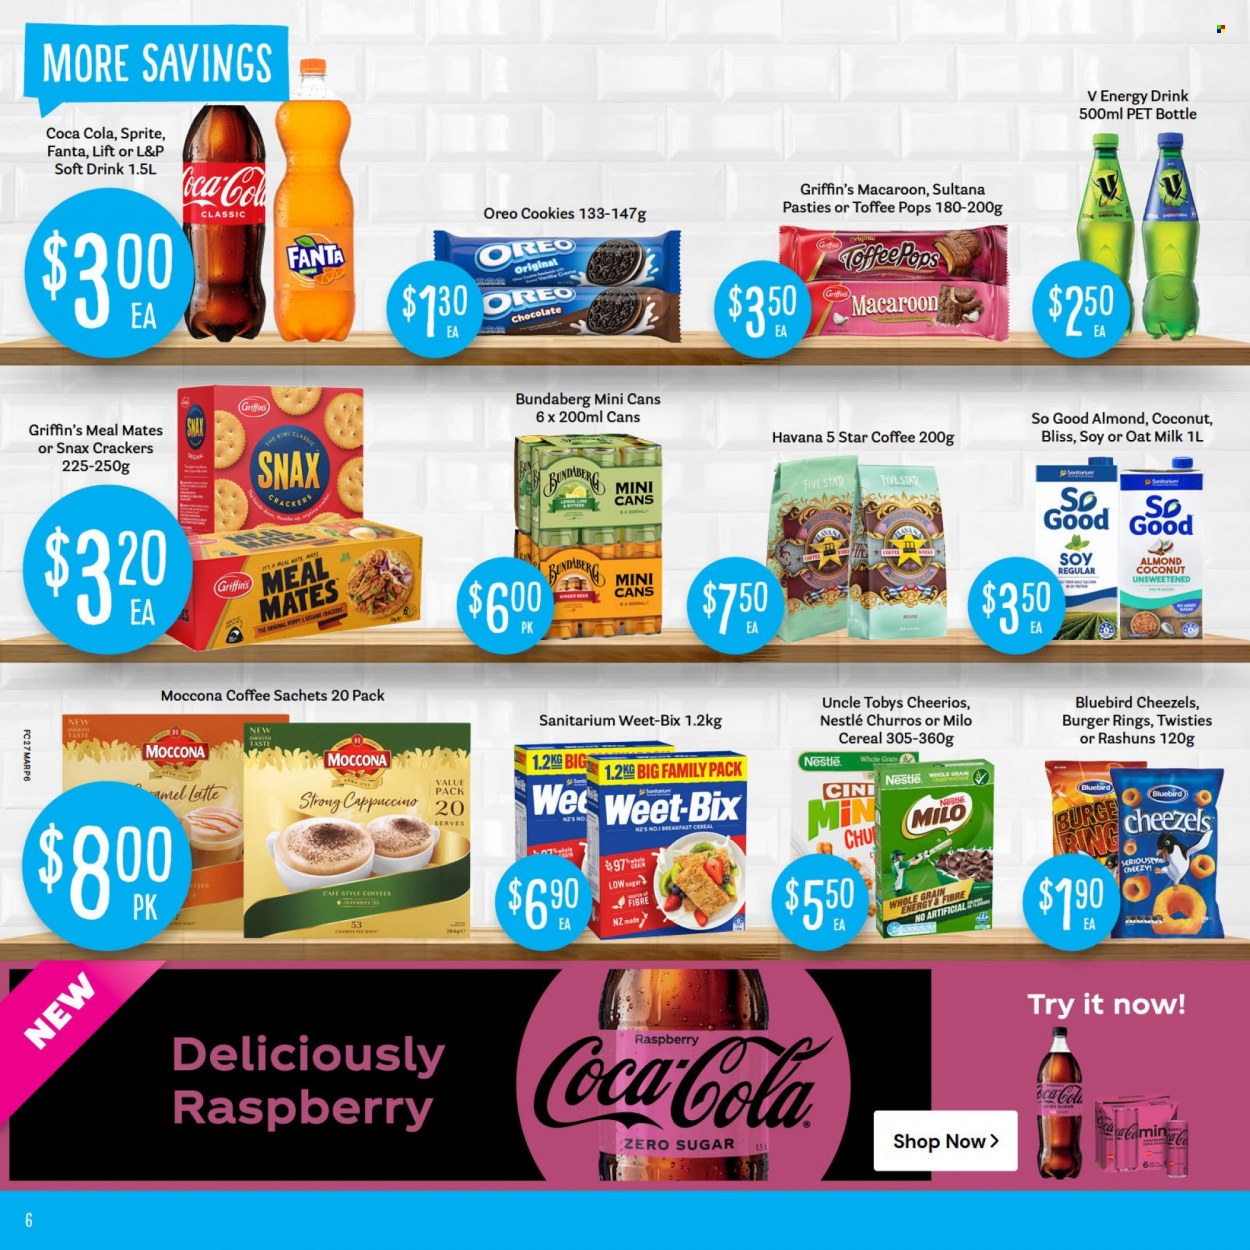 thumbnail - Fresh Choice mailer - 27.03.2023 - 02.04.2023 - Sales products - kiwi, hamburger, Oreo, milk, Milo, oat milk, cookies, Nestlé, chocolate, cereal bar, crackers, Griffin's, Bluebird, cereals, Cheerios, Weet-Bix, churros, Camel, Coca-Cola, Sprite, energy drink, Fanta, soft drink, L&P, Bundaberg, cappuccino, Moccona, beer, ginger beer. Page 6.